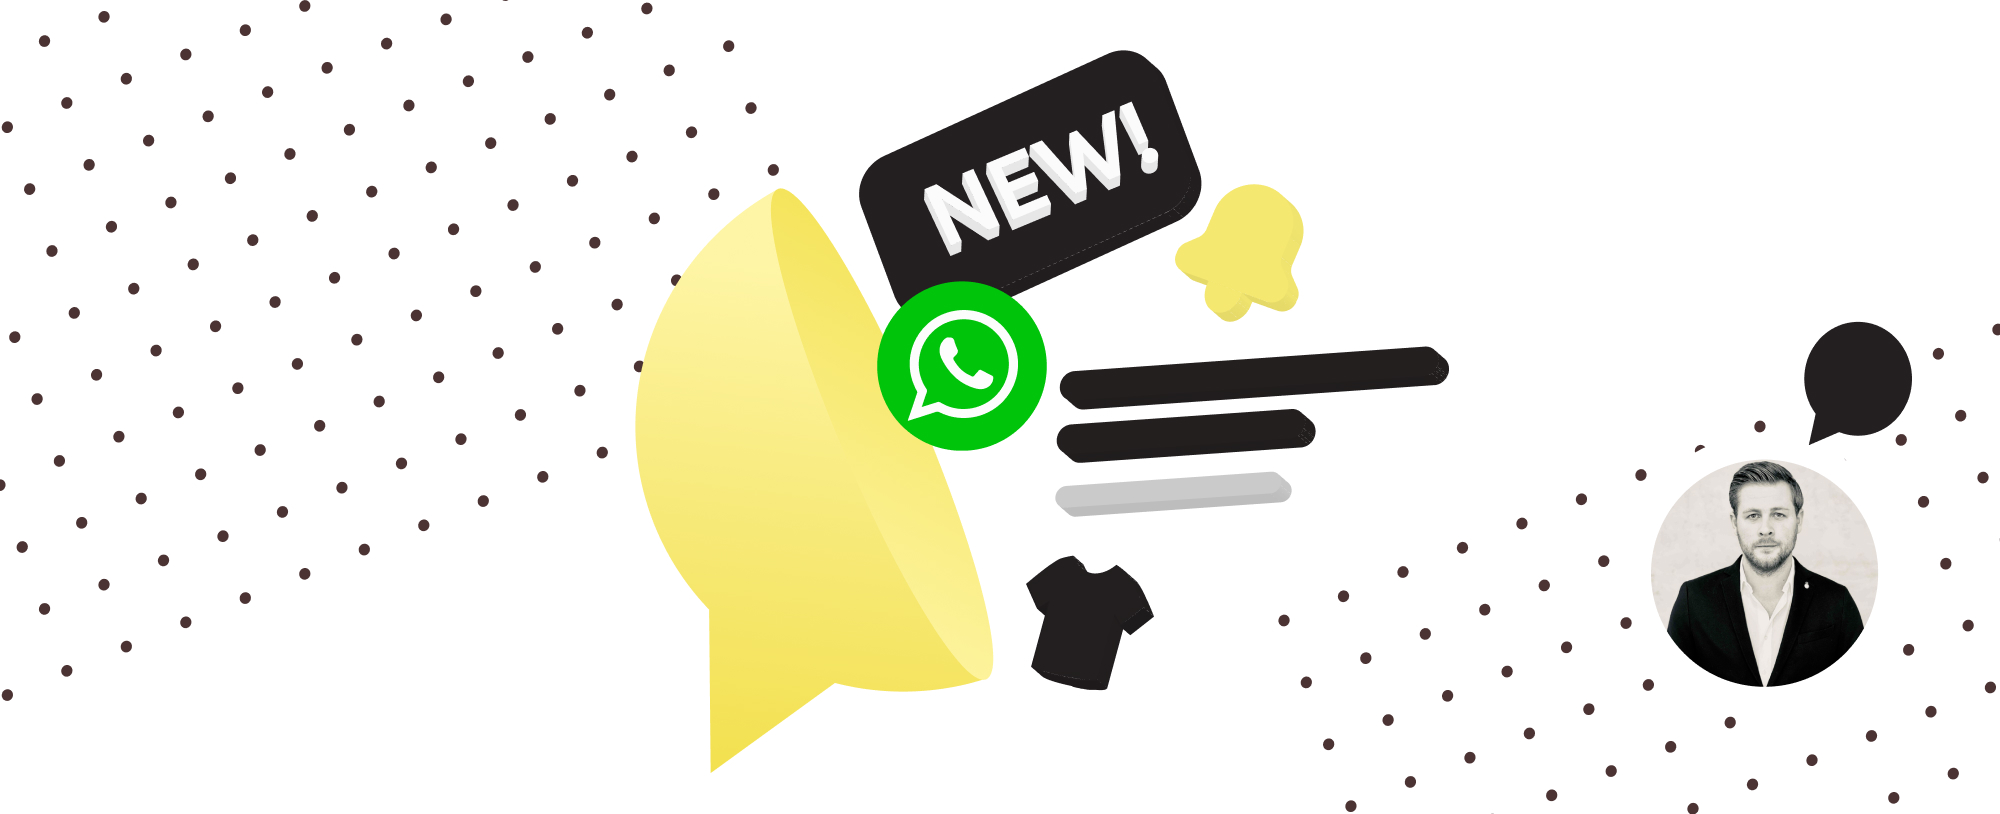 You can now send non-transactional notifications on WhatsApp! blog